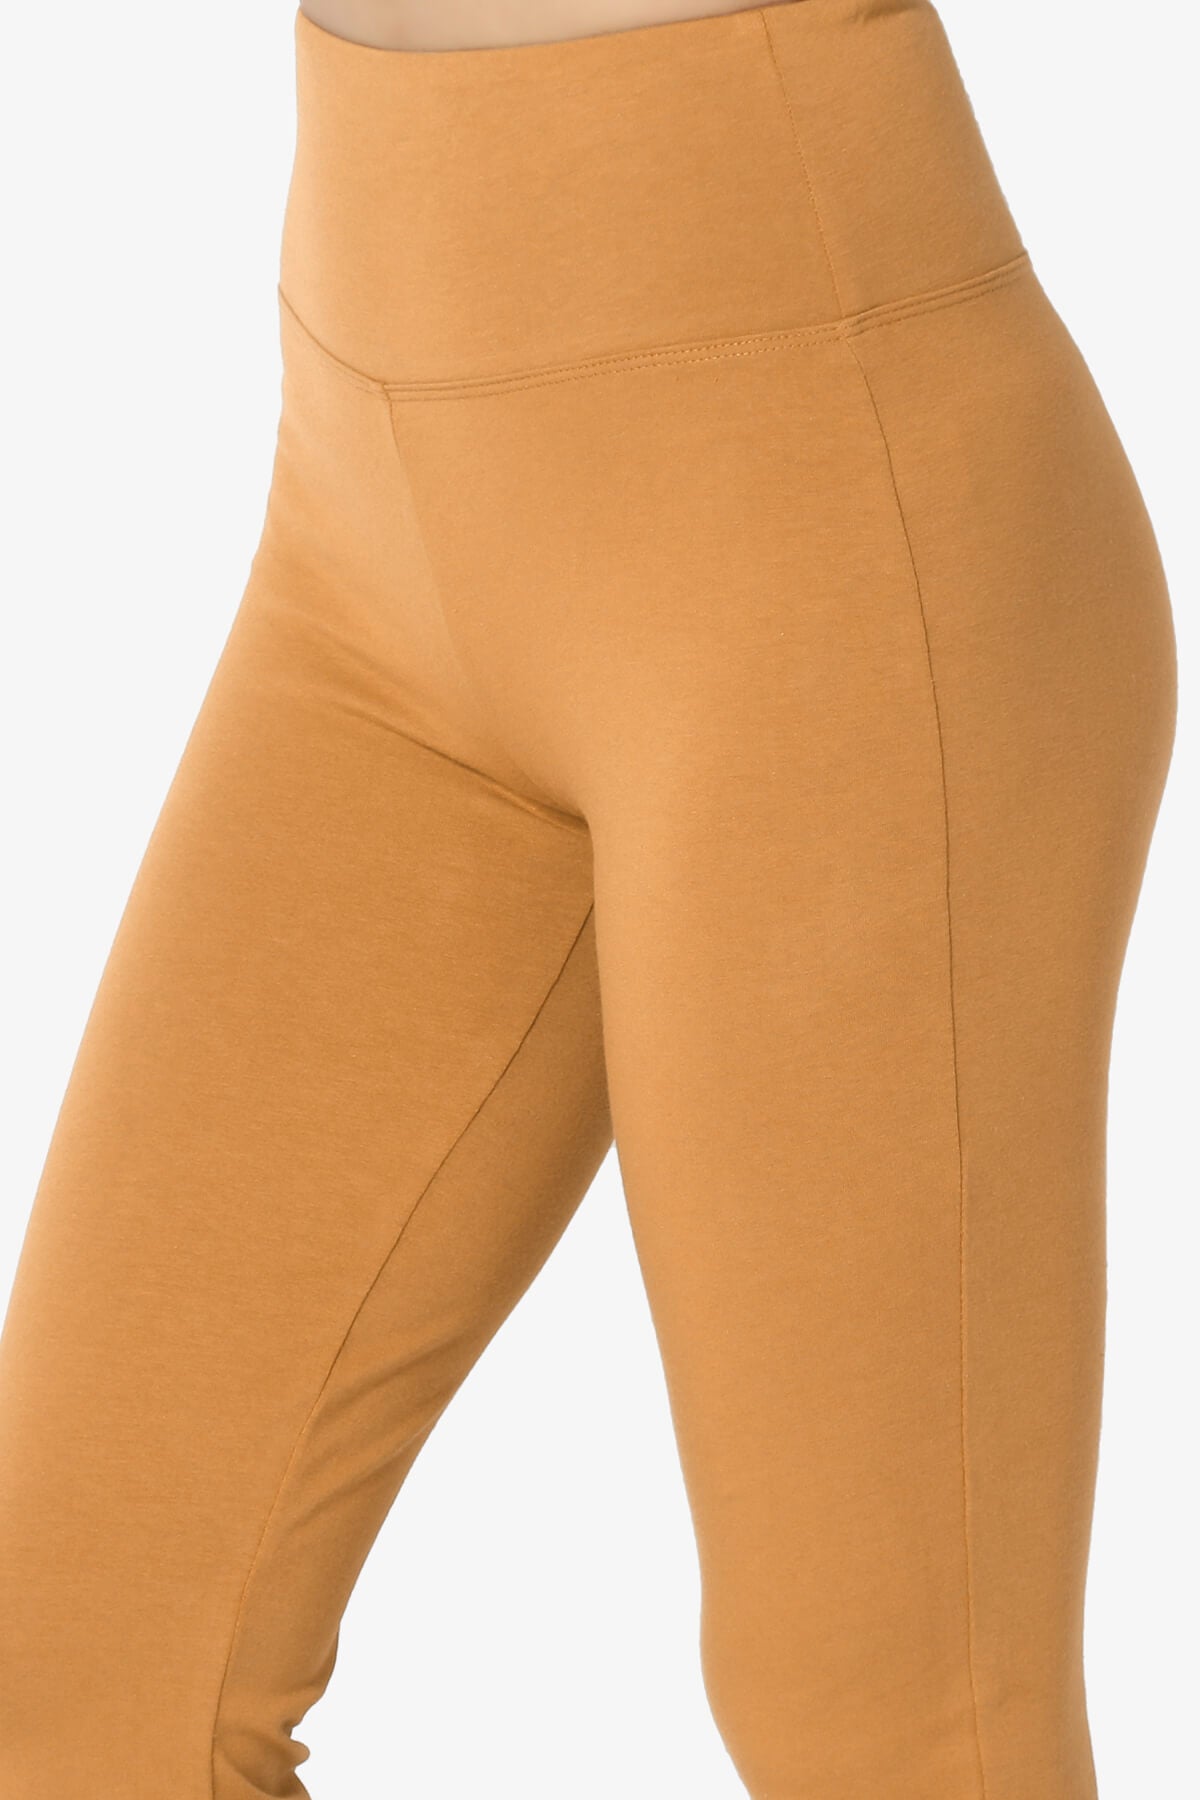 Load image into Gallery viewer, Zaylee Raw Hem Flared Comfy Yoga Pants GOLDEN MUSTARD_5
